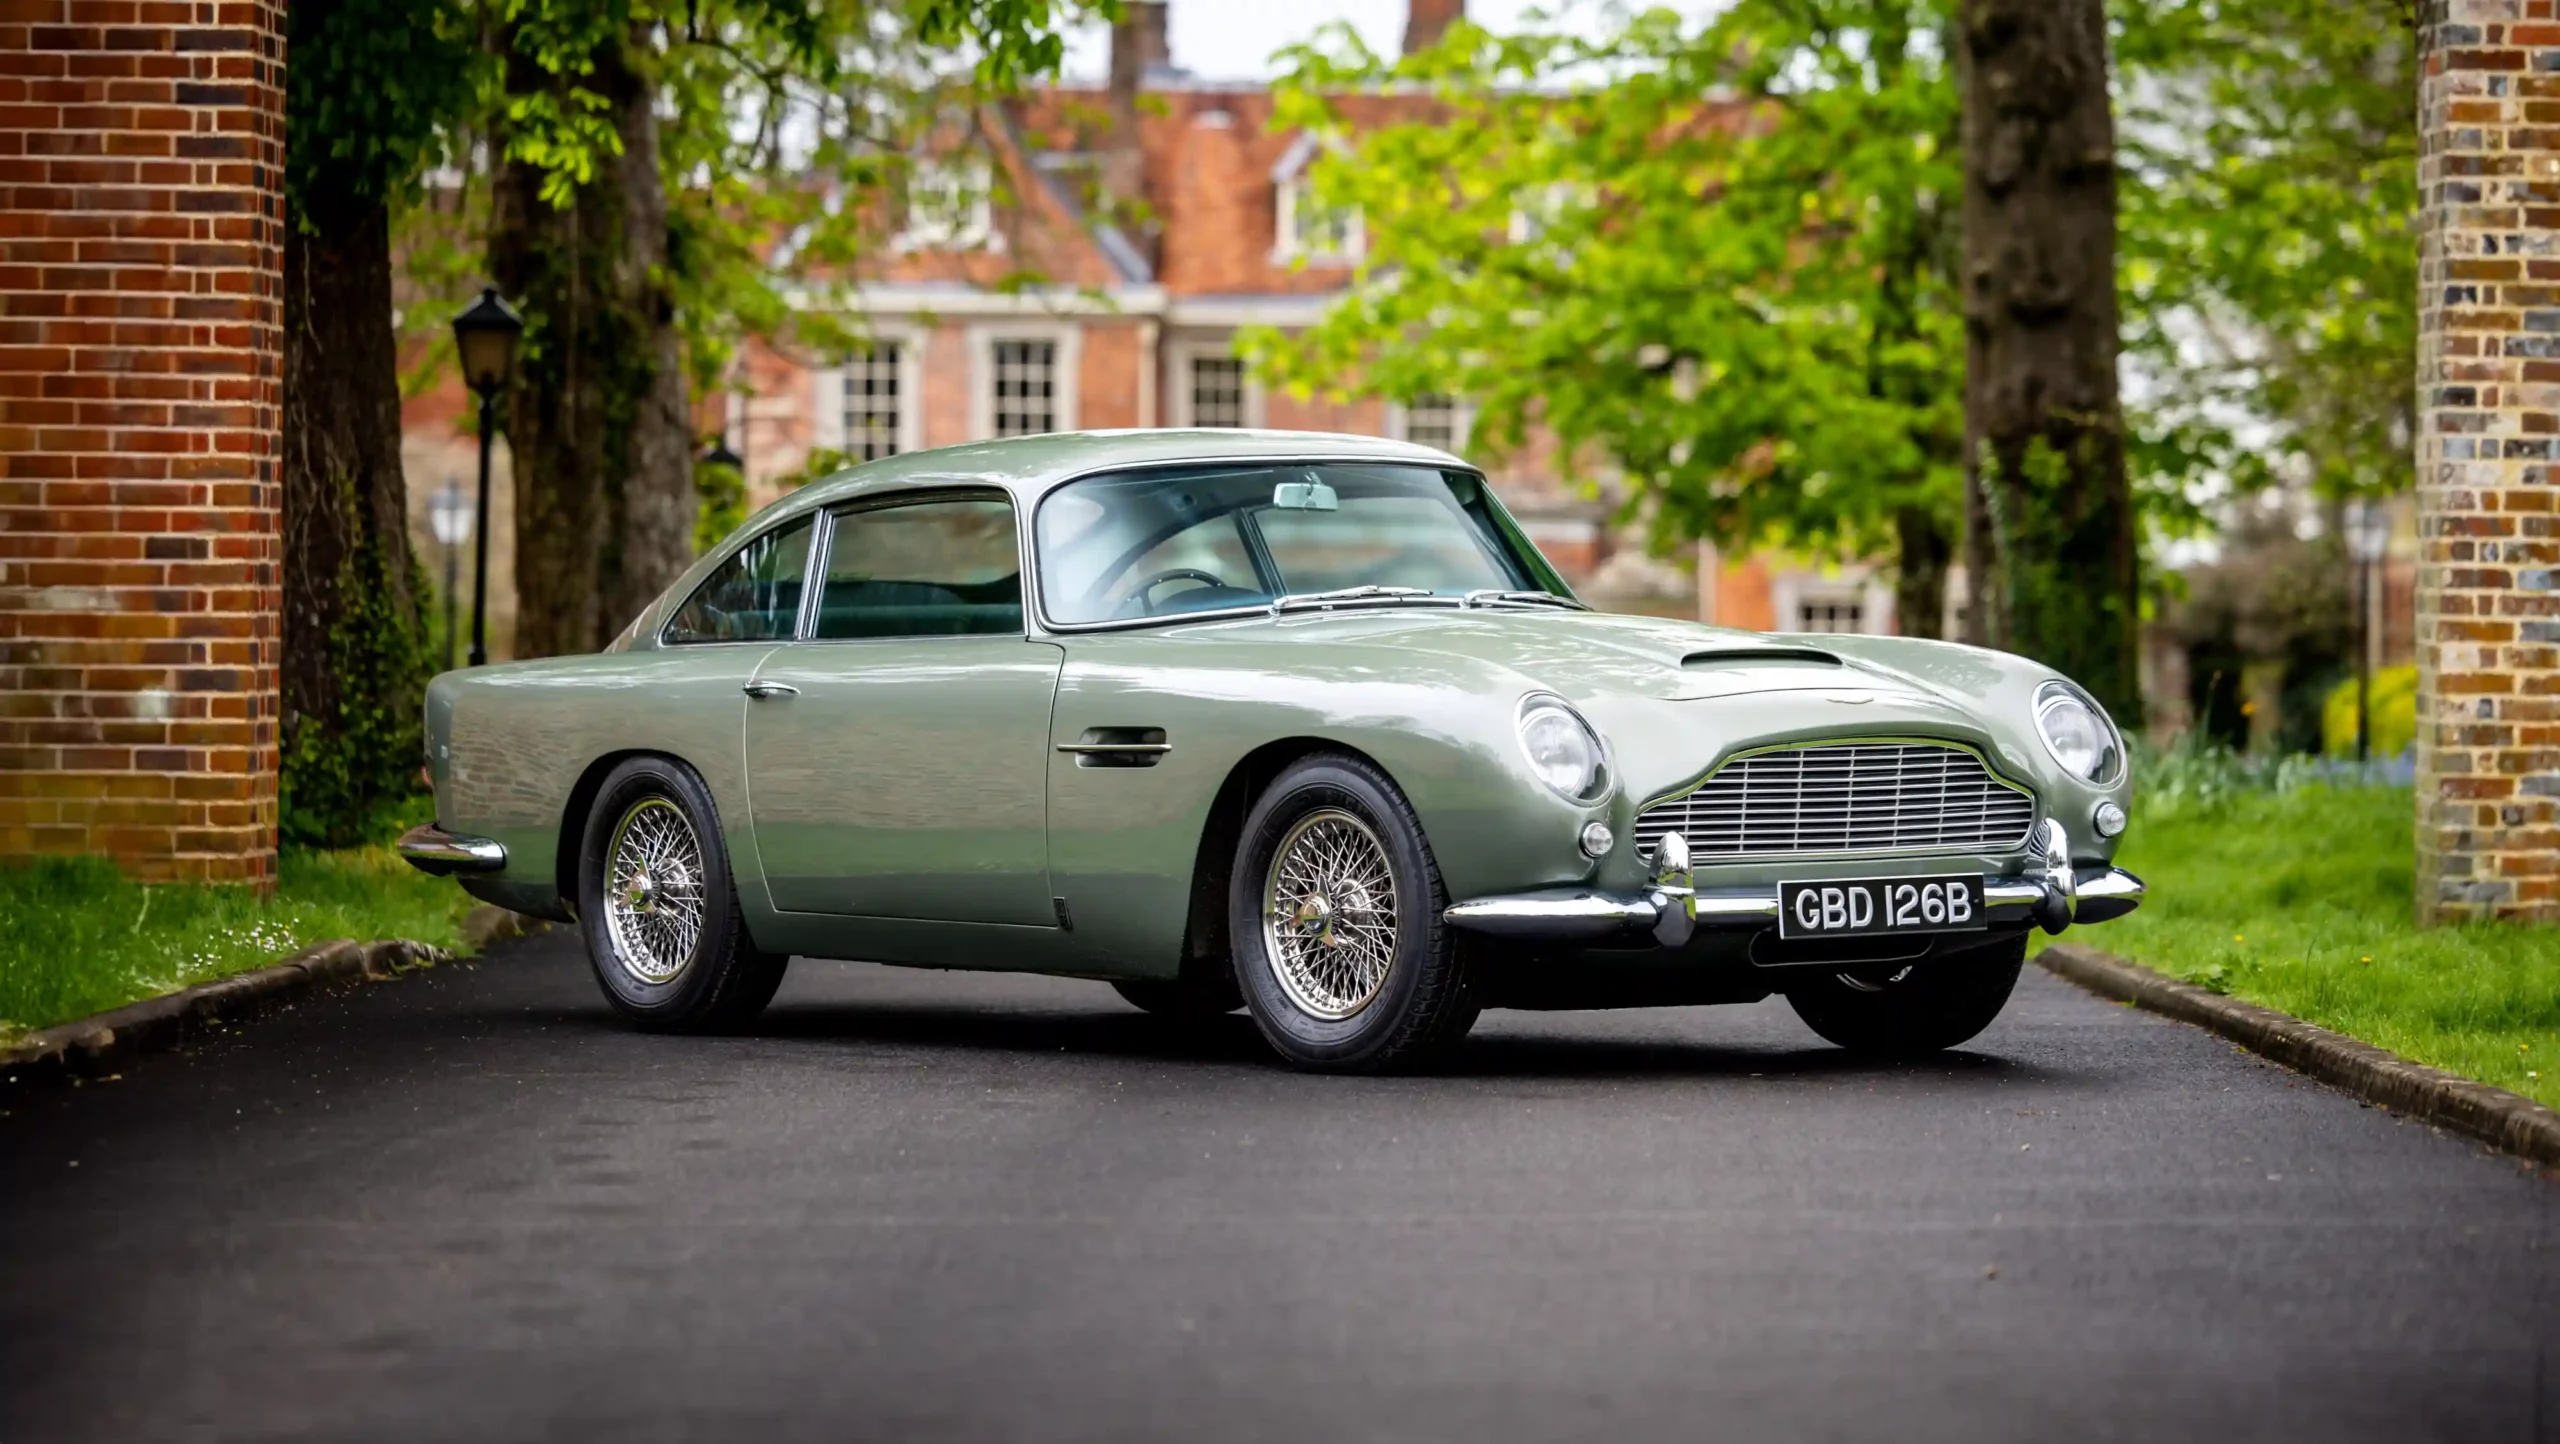 A classic 1964 Aston Martin DB5, famously driven by James Bond, is hitting the auction block in Berkshire. With a top speed exceeding 150mph, this sage green beauty is a rare find, one of just 887 ever made. Expected to fetch £425,000 - £475,000.